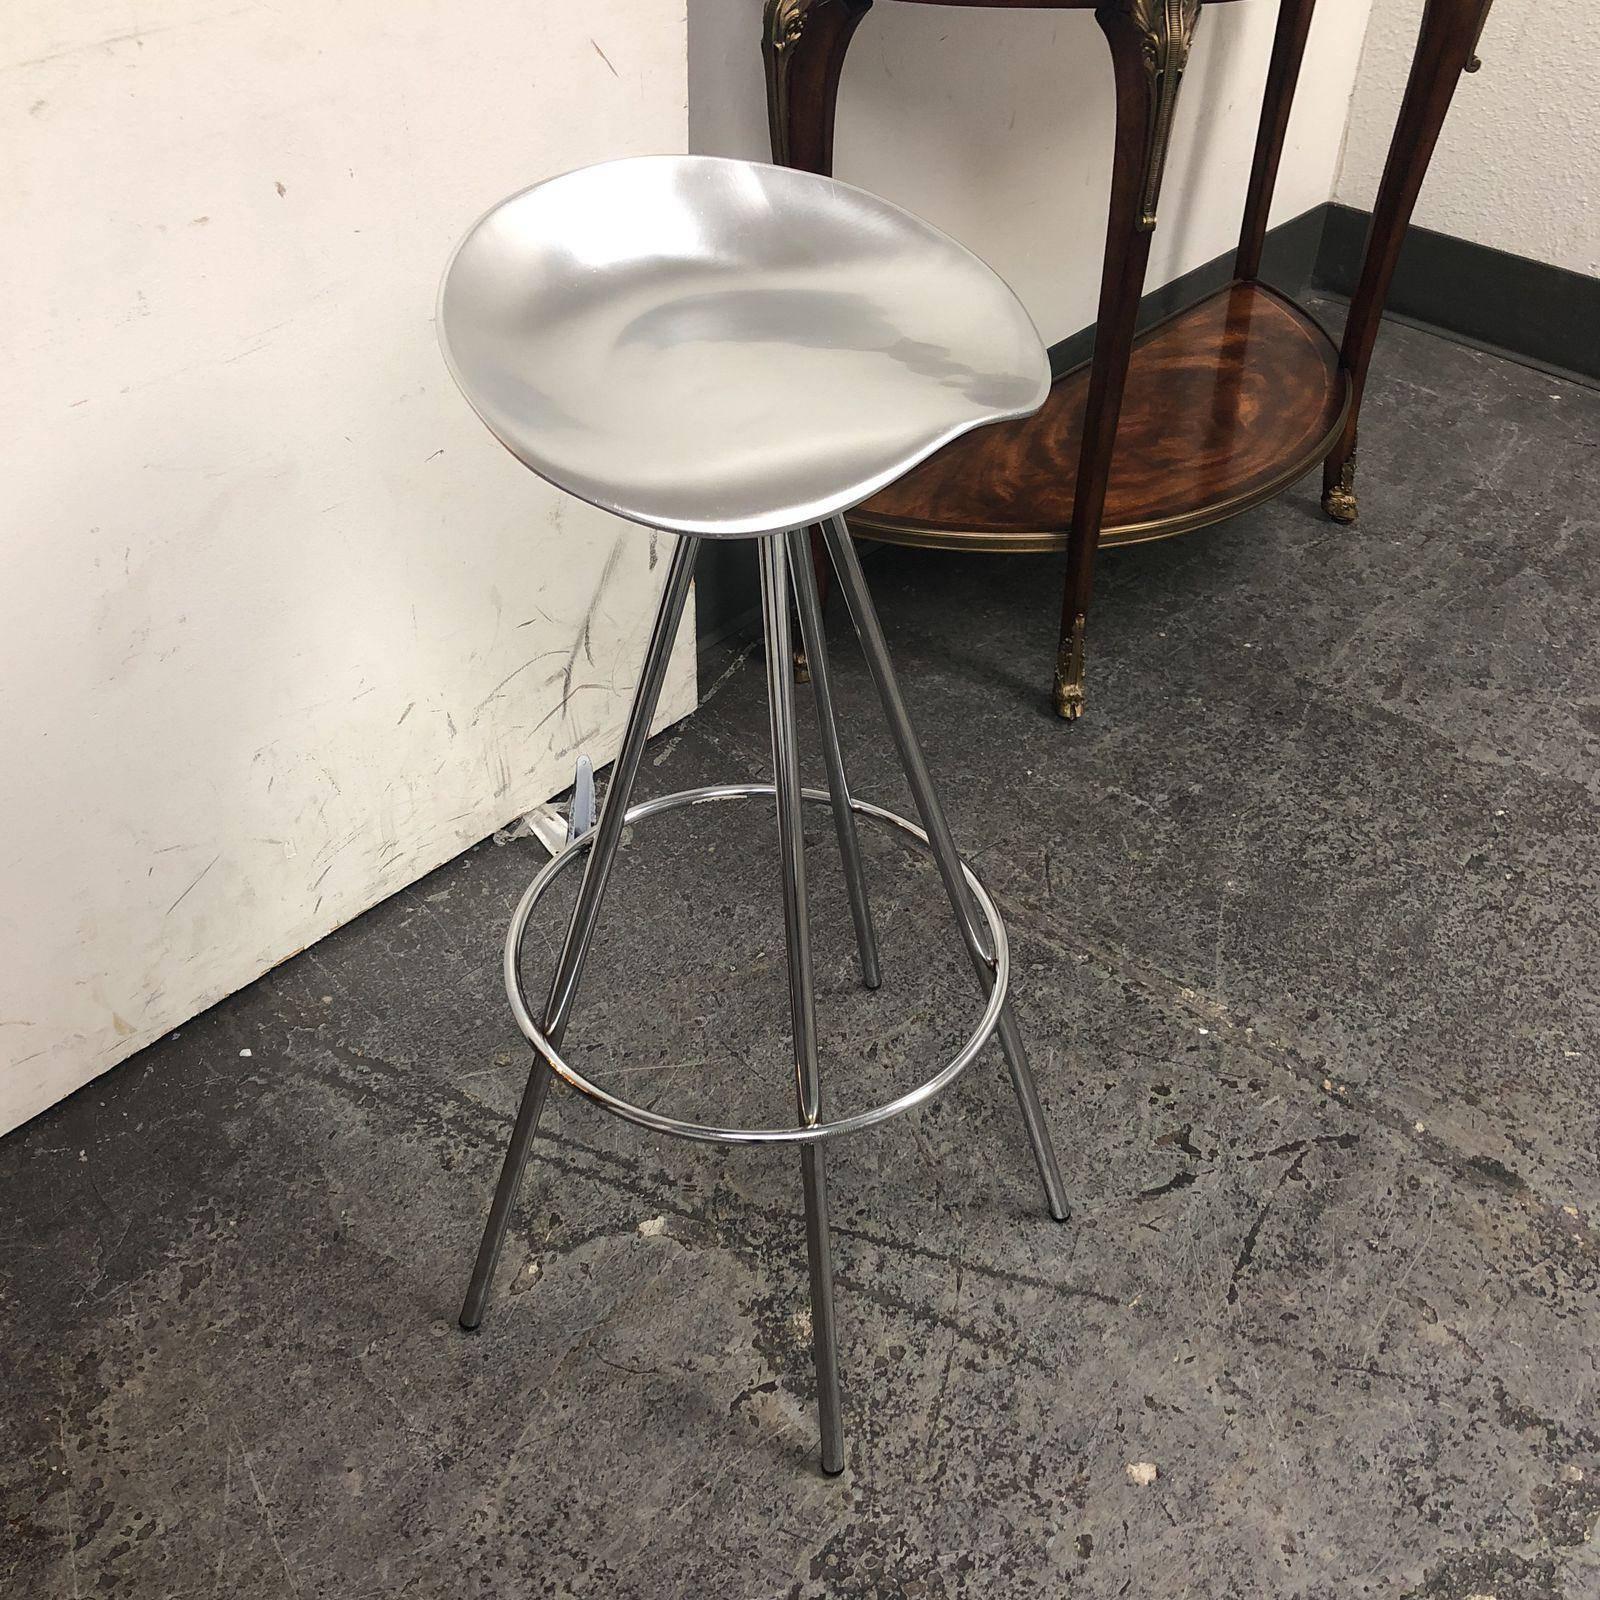 A Jamaica stool. The stool was designed by Pepe Cortes for Amat in Spain, it was distributed by Knoll. The stool has an Aluminum saddle-like seat which swivels and a chrome frame.
 